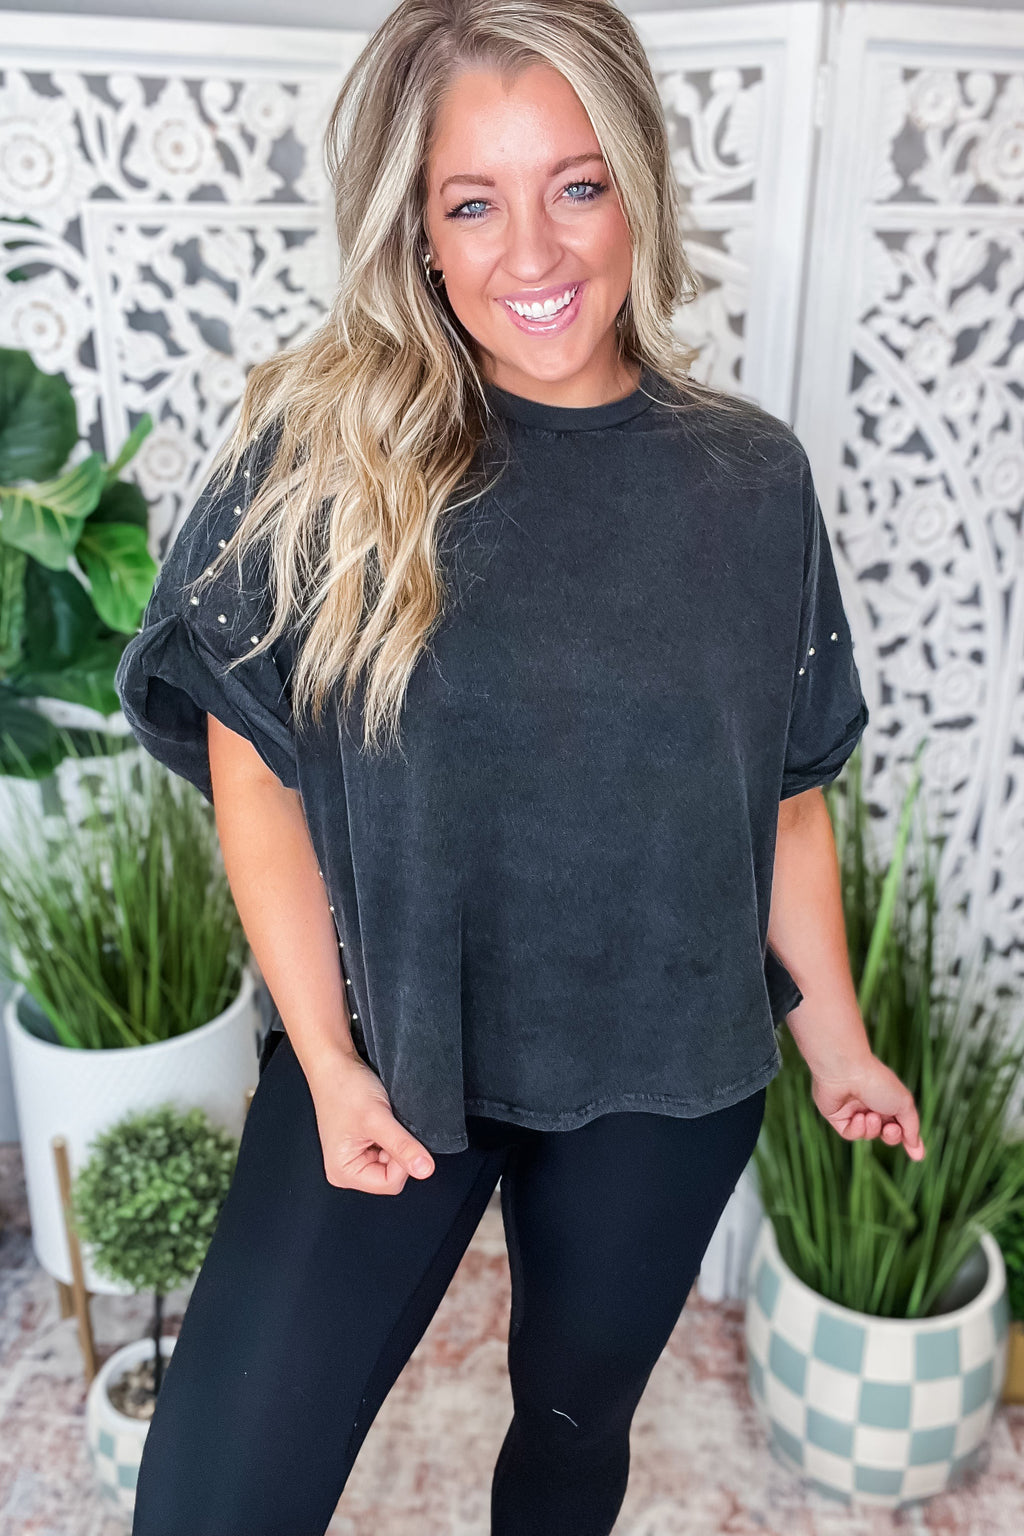 Livin' On The Edge - Studded Over sized High Low T Shirt - Black